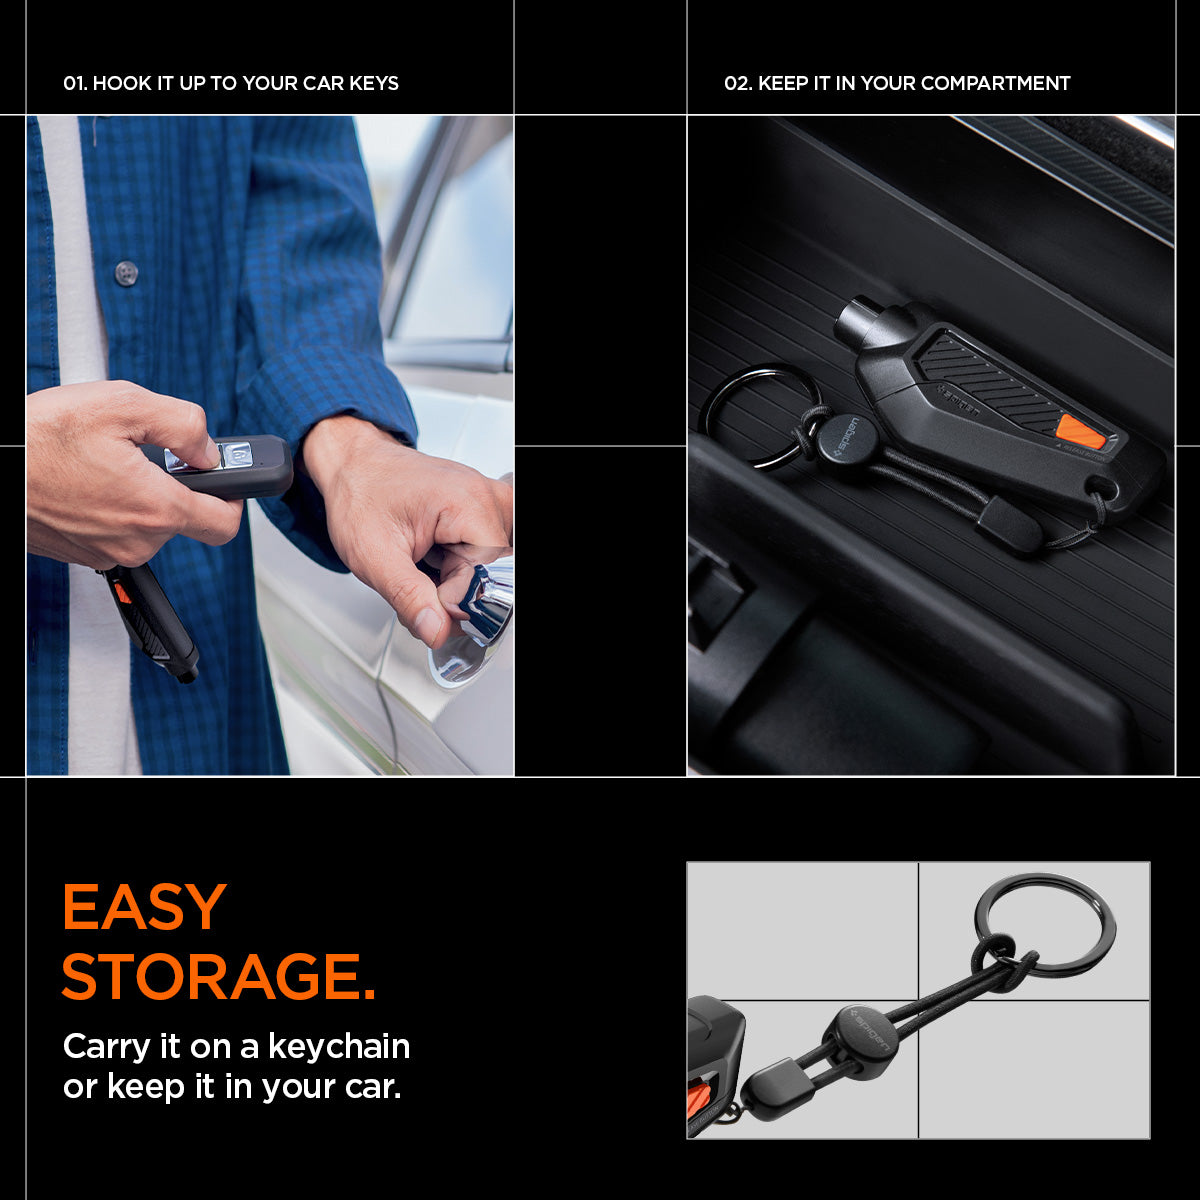 ACP06988 - Car Escape Tool in Black showing the Easy Storage. You can Hook it up to your car keys and or Keep it in your compartment